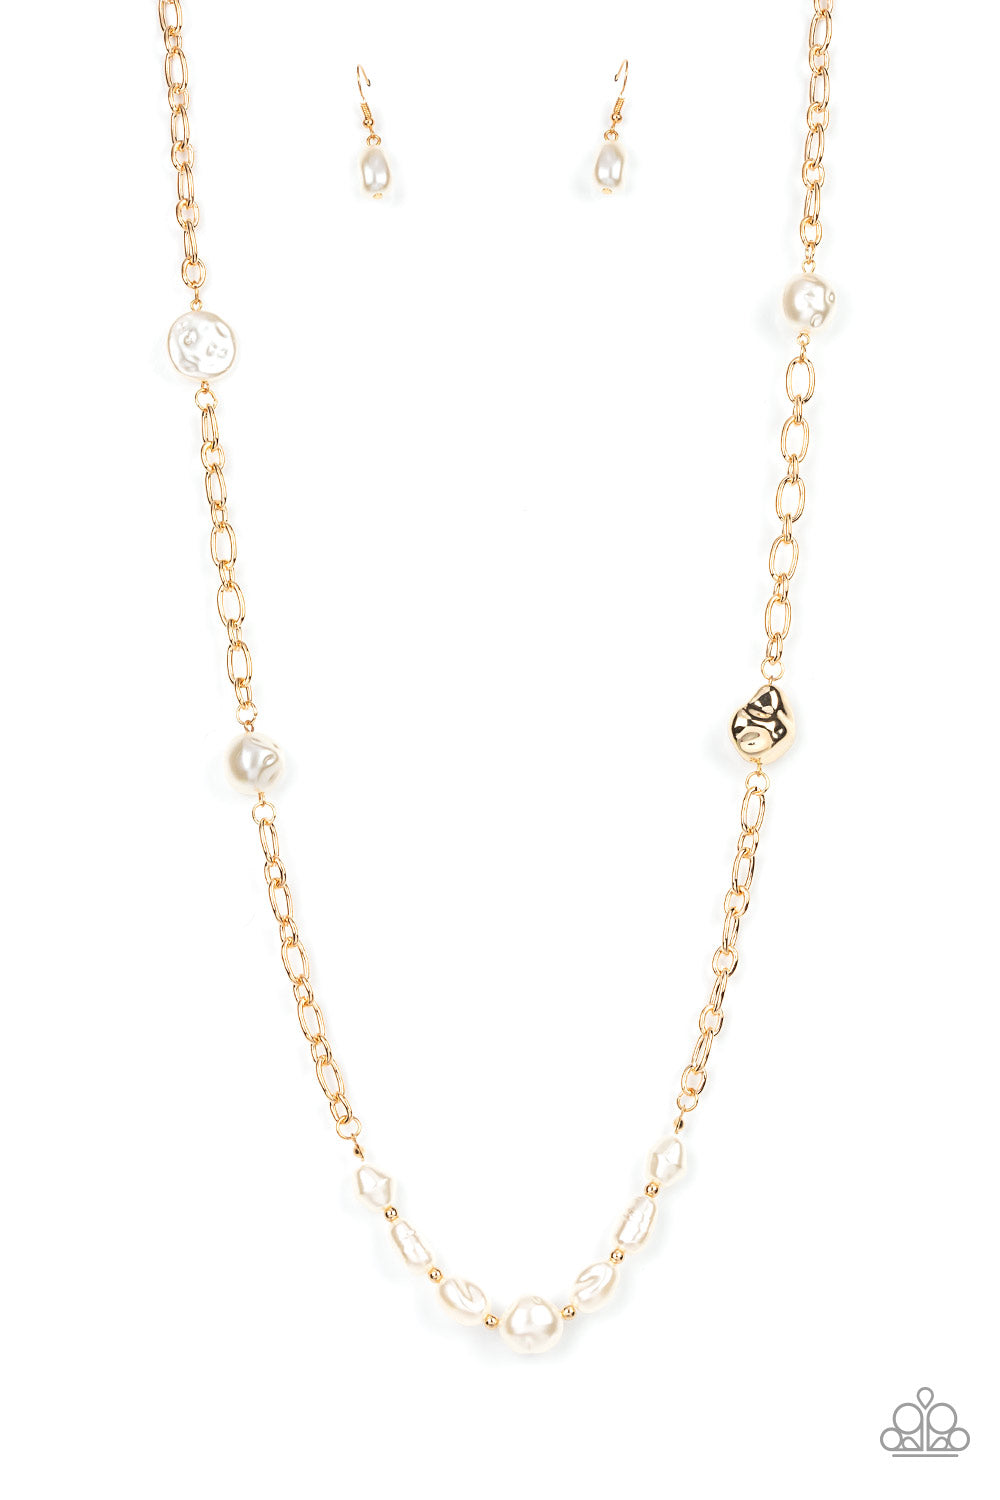 Pardon My FABULOUS - Gold Item #P2RE-GDXX-398XX Infused with dainty gold beads, an elegant collection of imperfect white pearls and gold beads asymmetrically adorn a substantial gold chain across the chest for an effortless elegance. Features an adjustable clasp closure.  Sold as one individual necklace. Includes one pair of matching earrings.